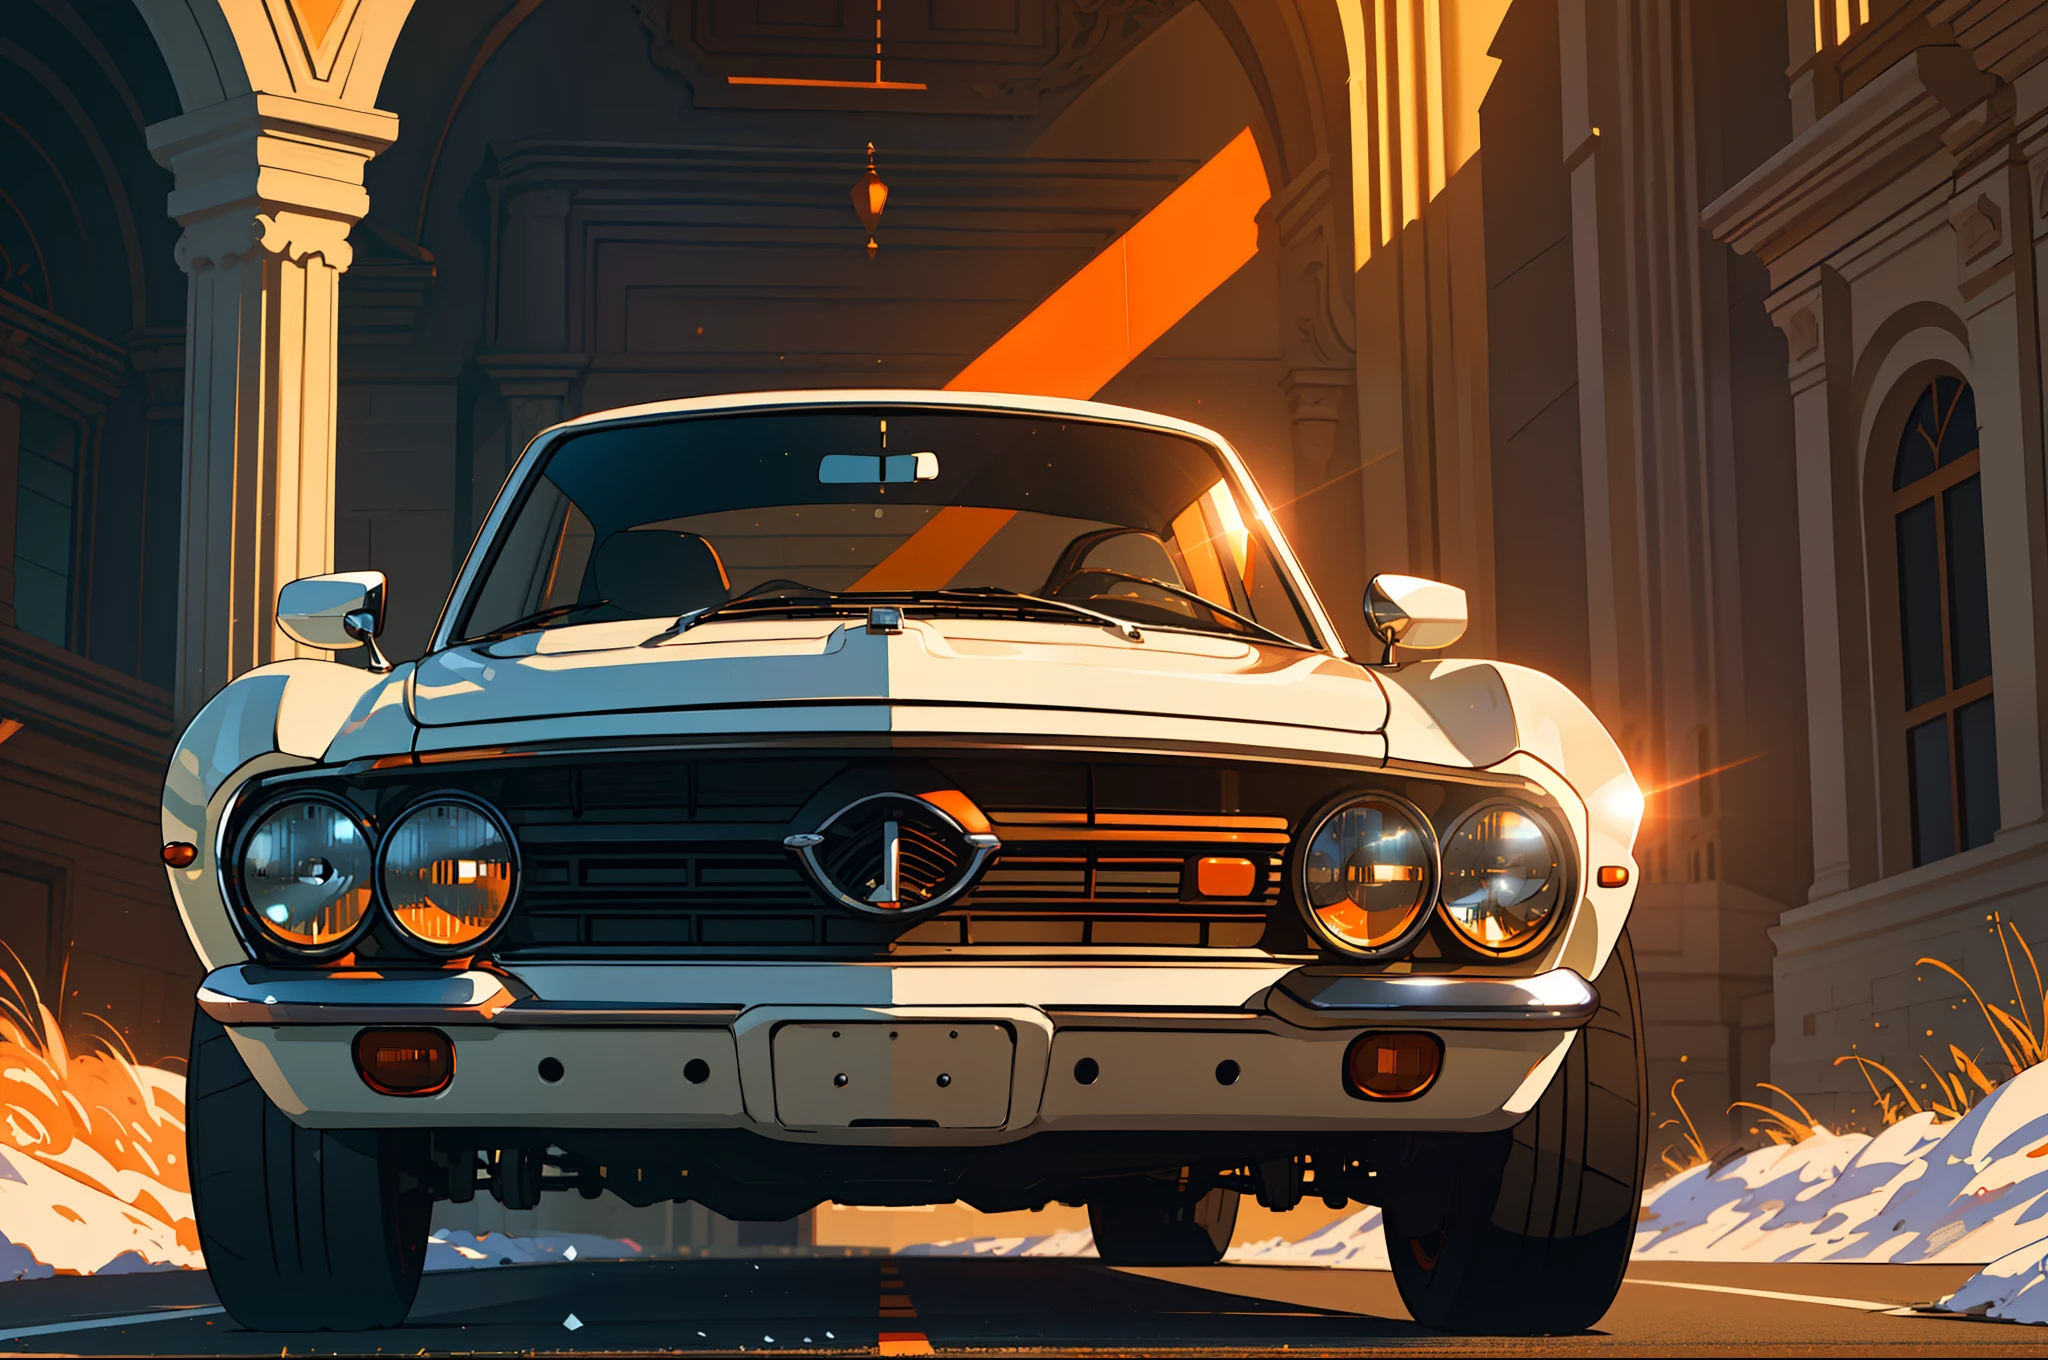 (masterpiece)+, (Best Quality)+, (Intricate Detail)+, design me the most beautiful car in the world, white paint with orange highlights, showroom concept, lens flare, camera artefact, professional photographer, 4k, HDR, longitudinal symmetry